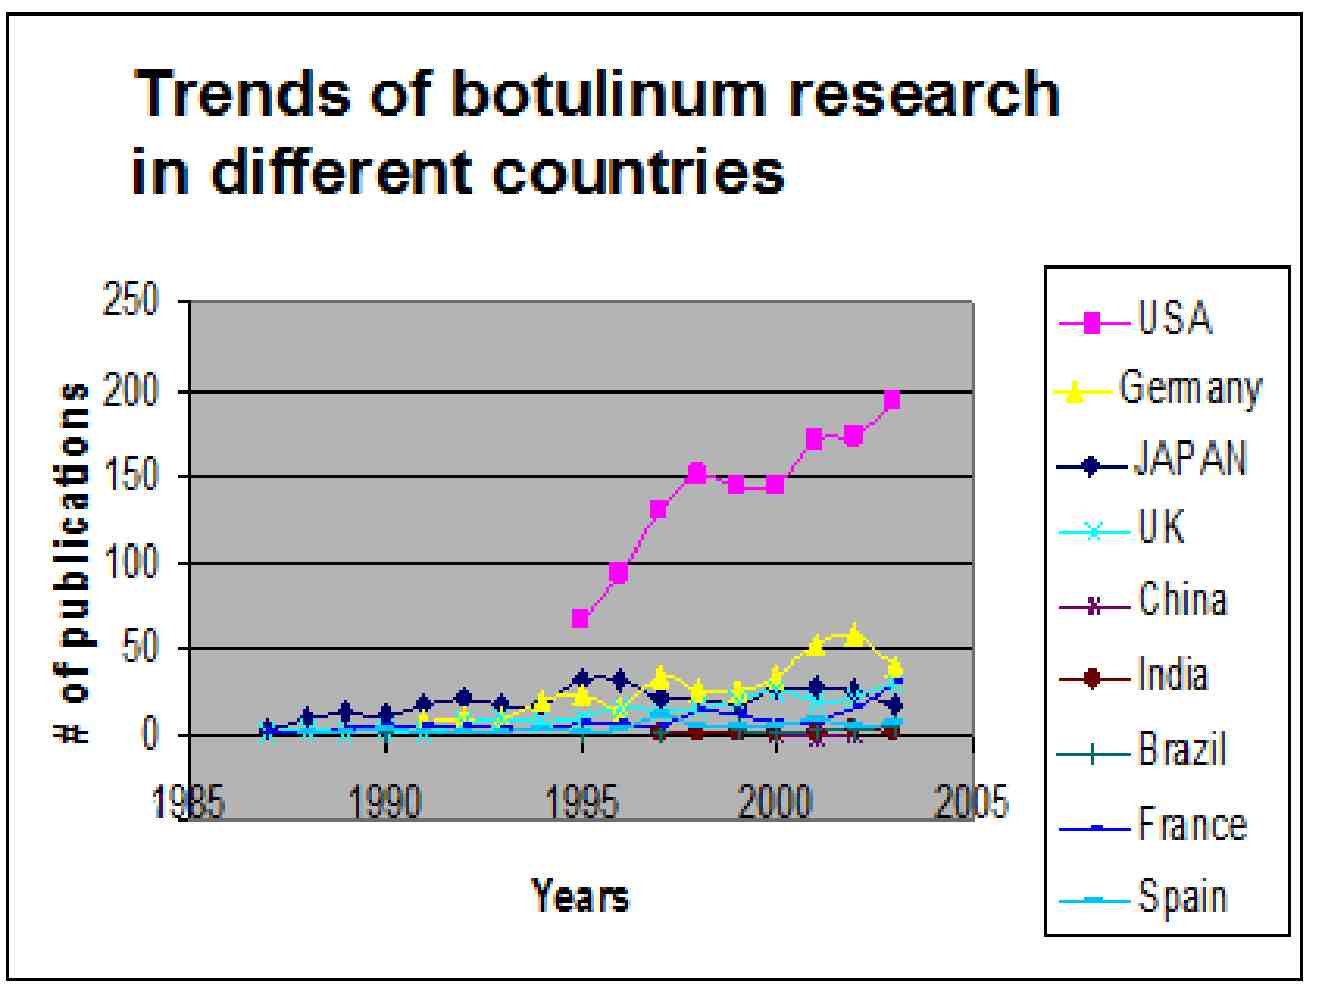 Figure showing trends of Botulinum research in various countries